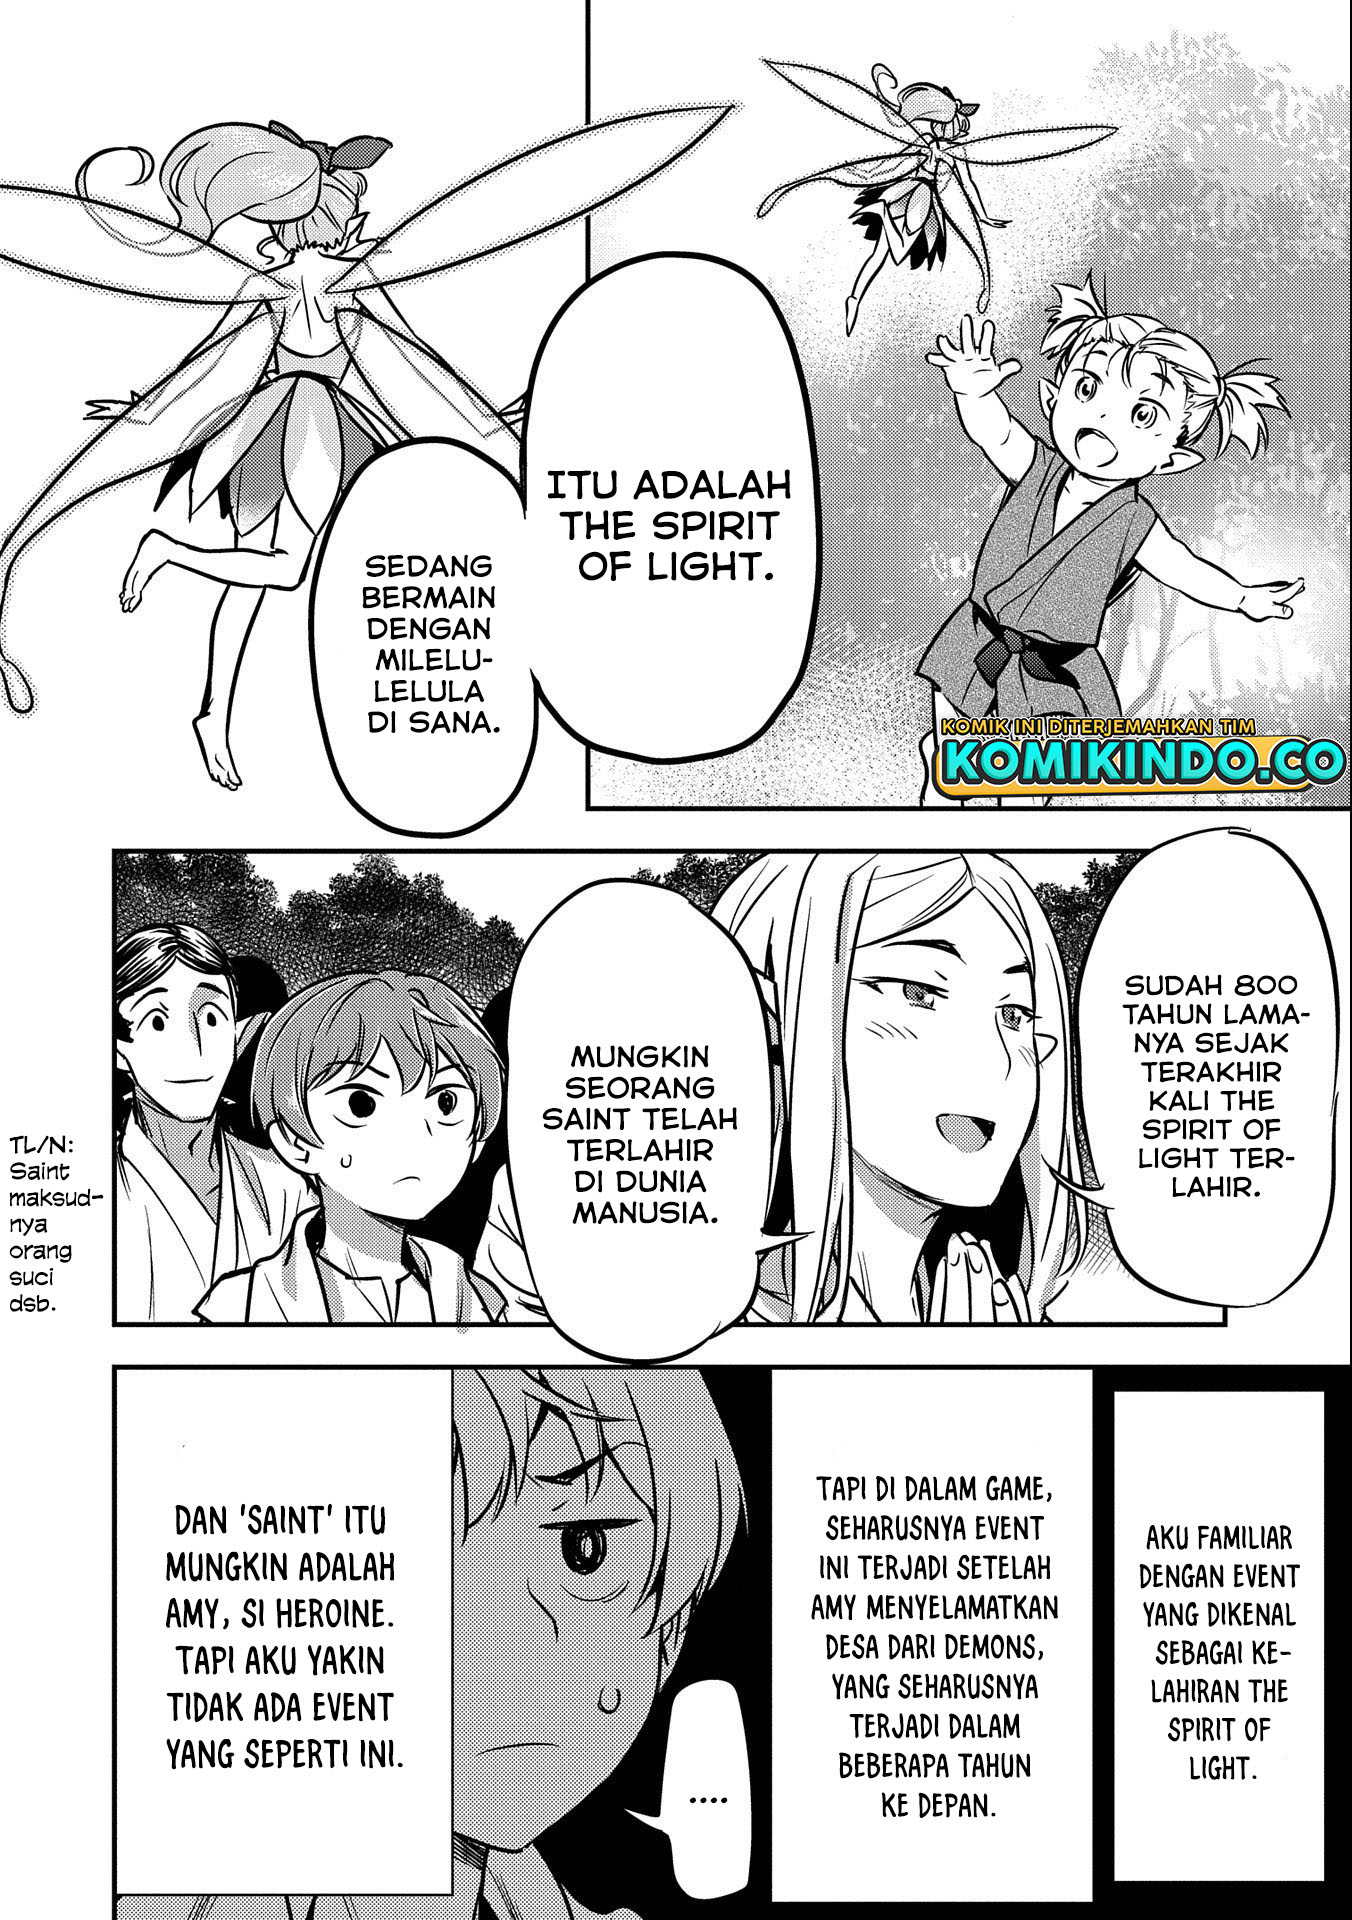 Villager A Wants to Save the Villainess no Matter What! Chapter 09